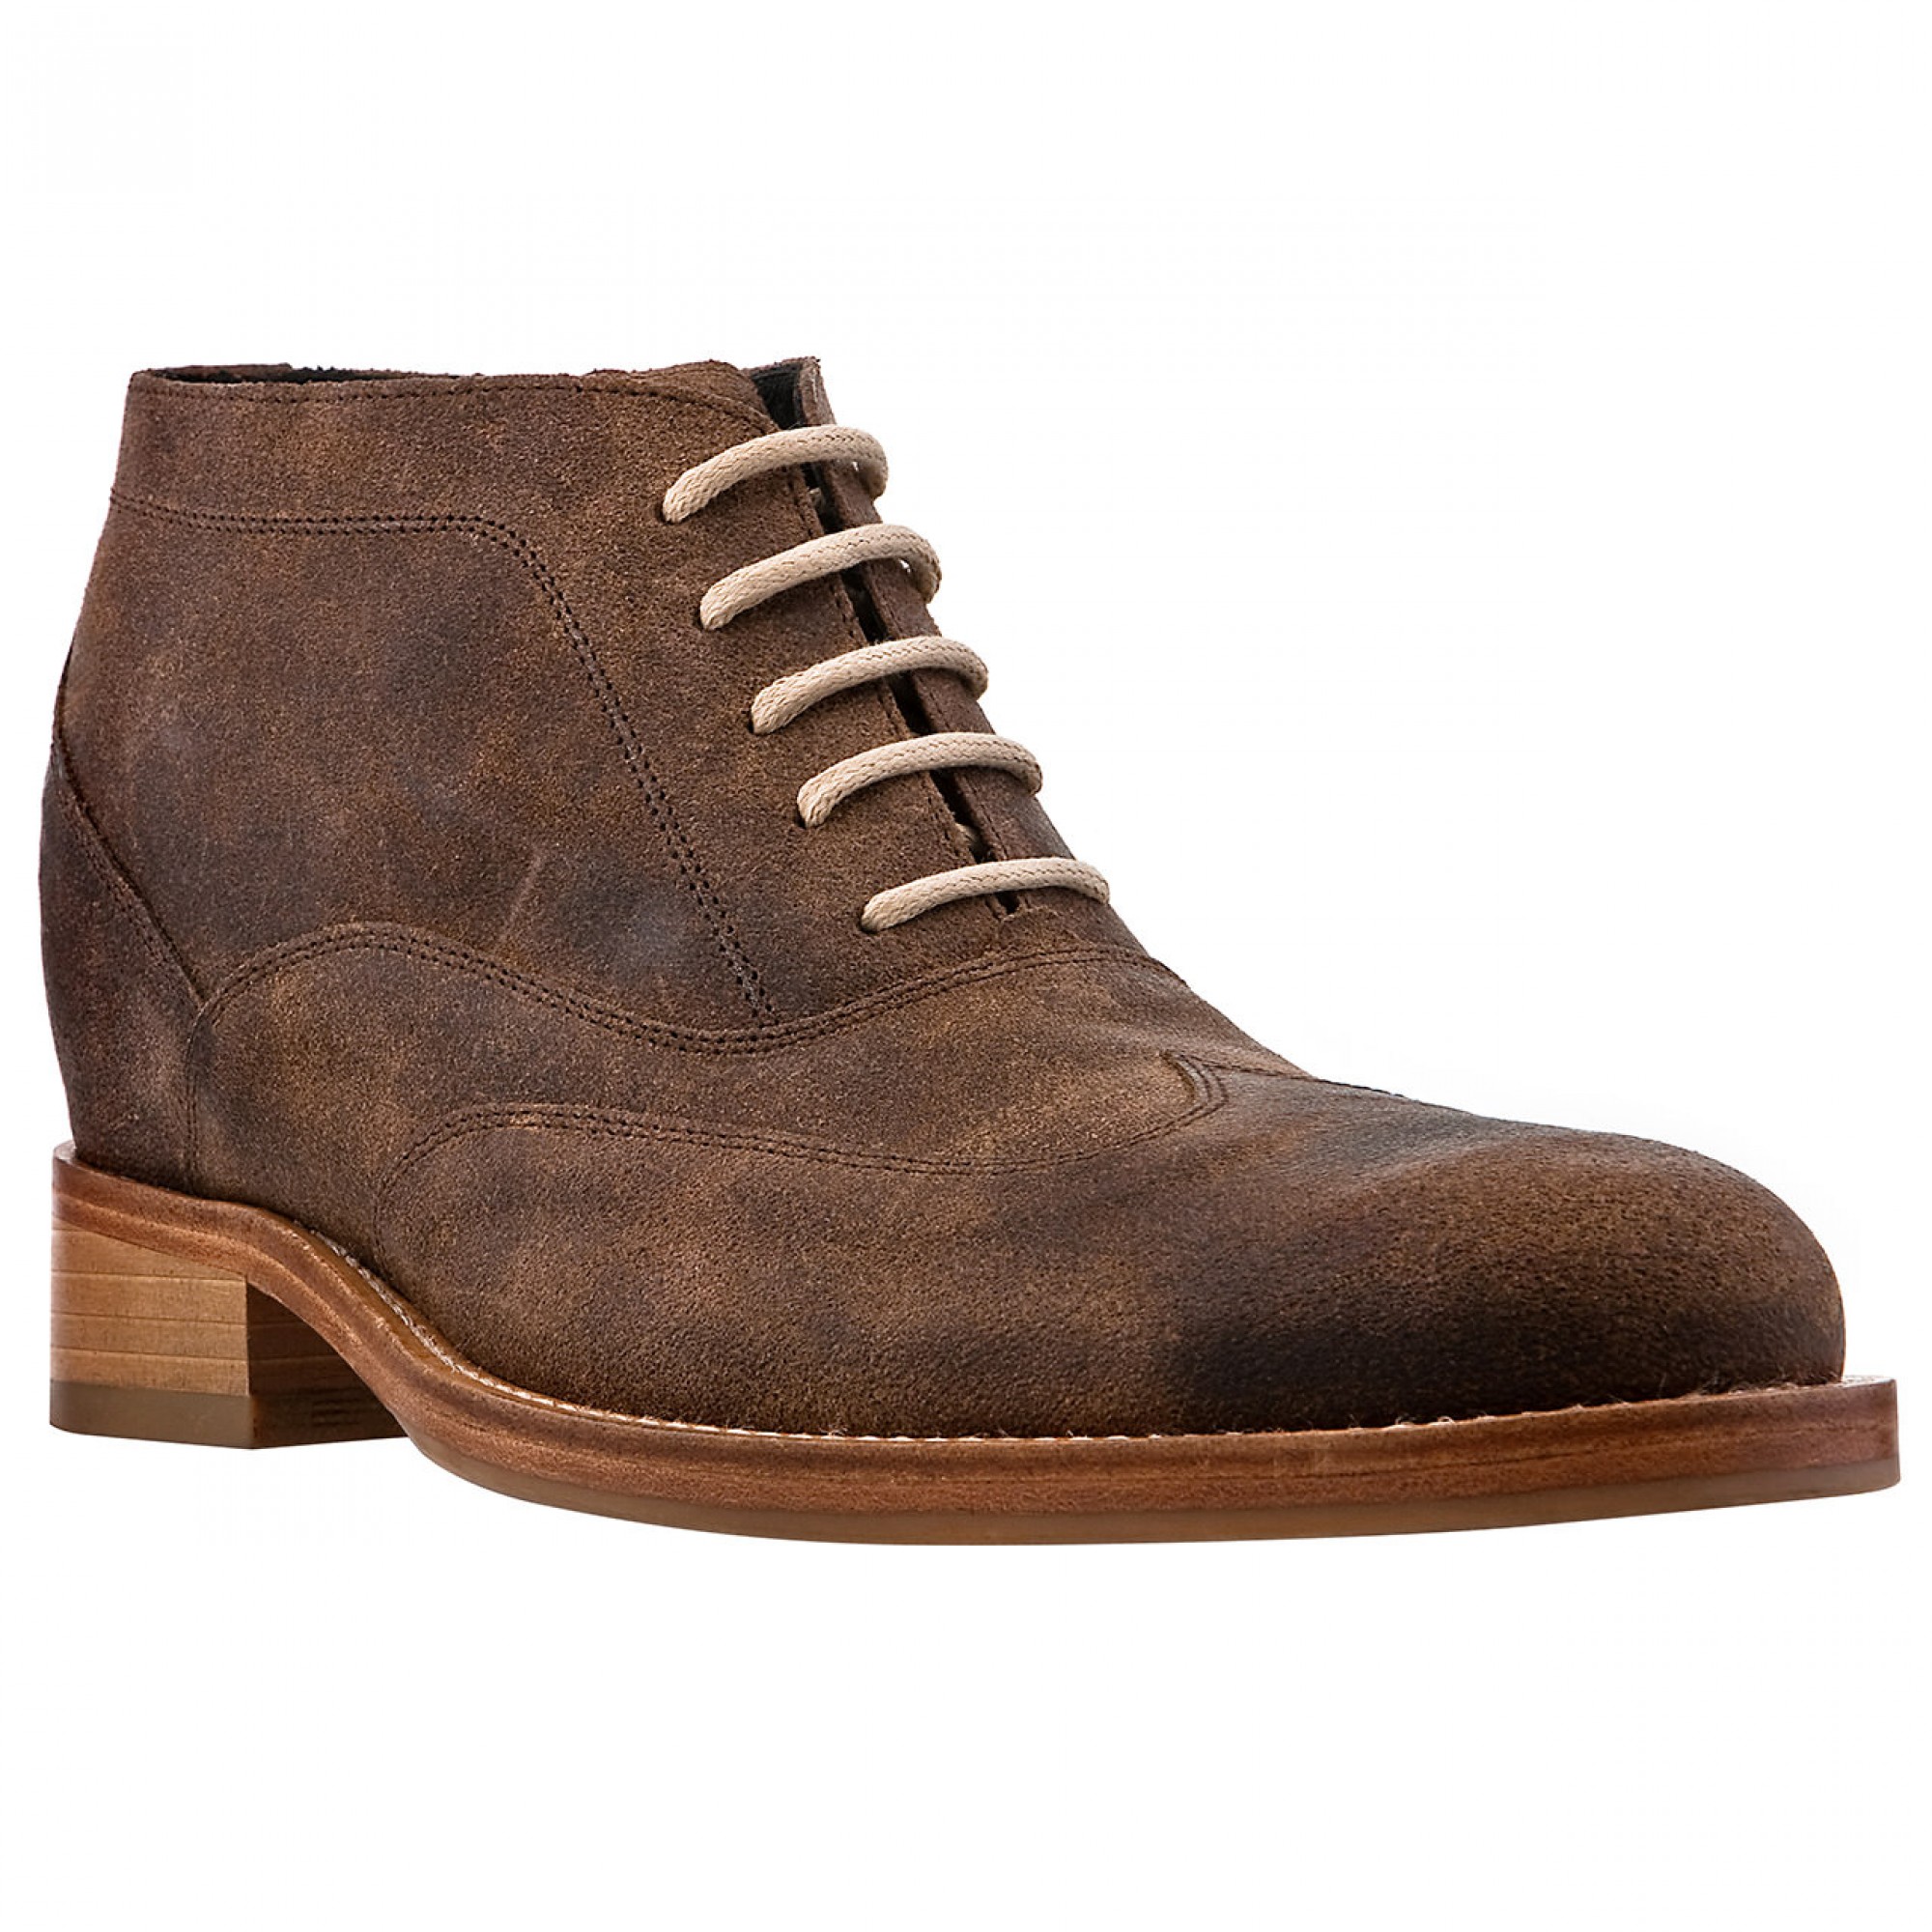 Arizona - Elevator Boots in Full Grain Leather from 2.4 to 3.1 inches